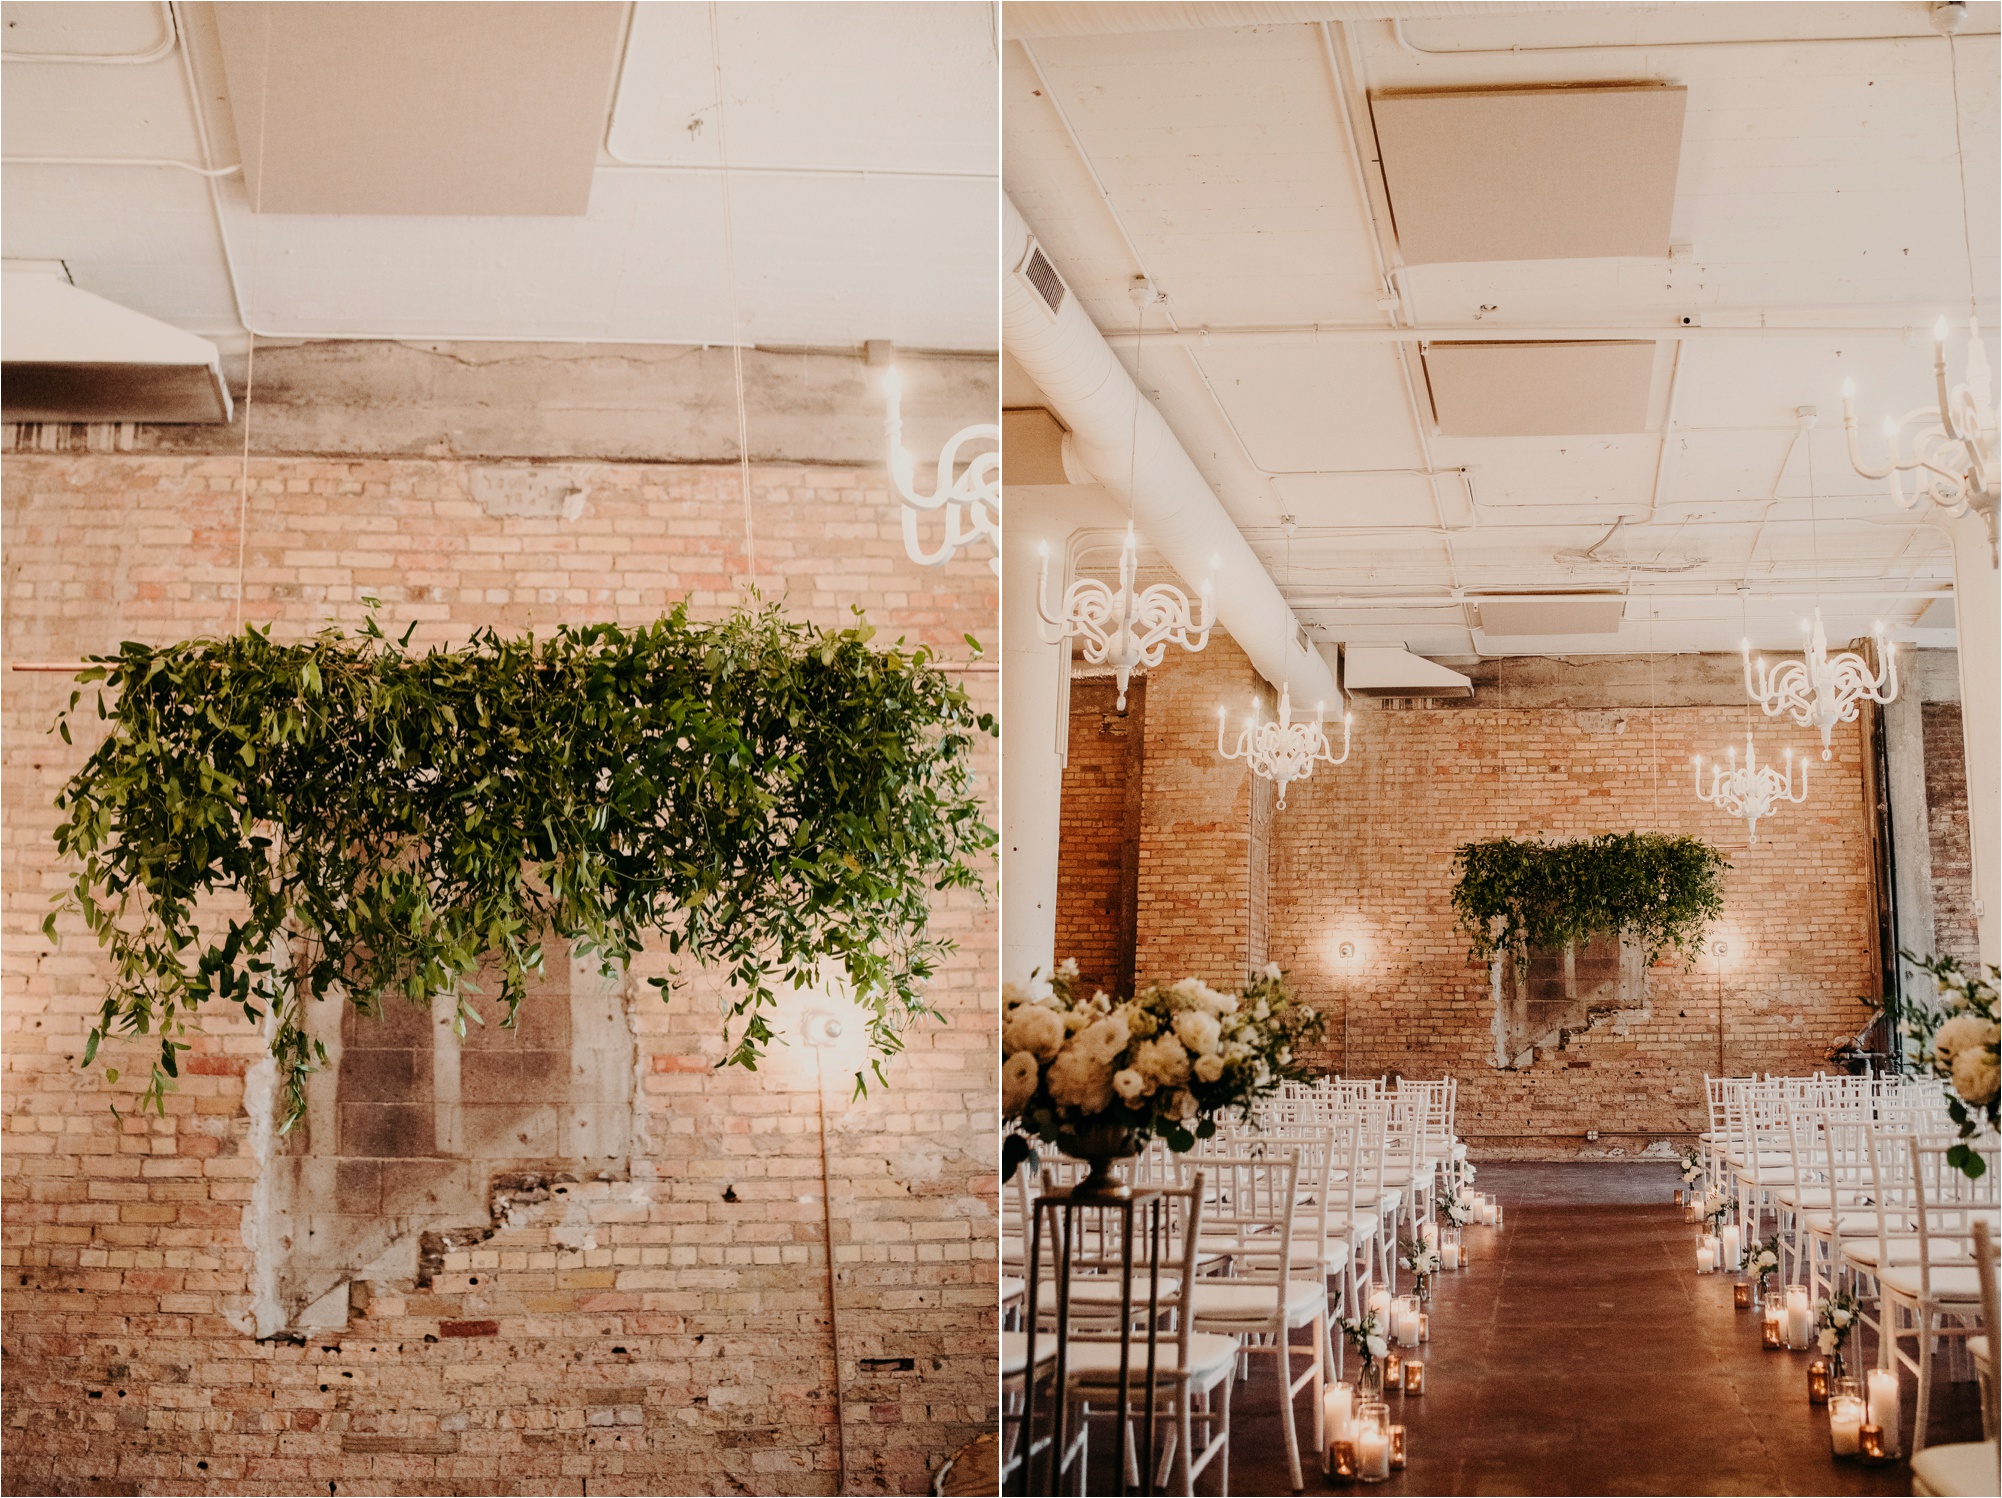  loring social minneapolis wedding ceremony space pristine floral buck and rose d’amico catering 